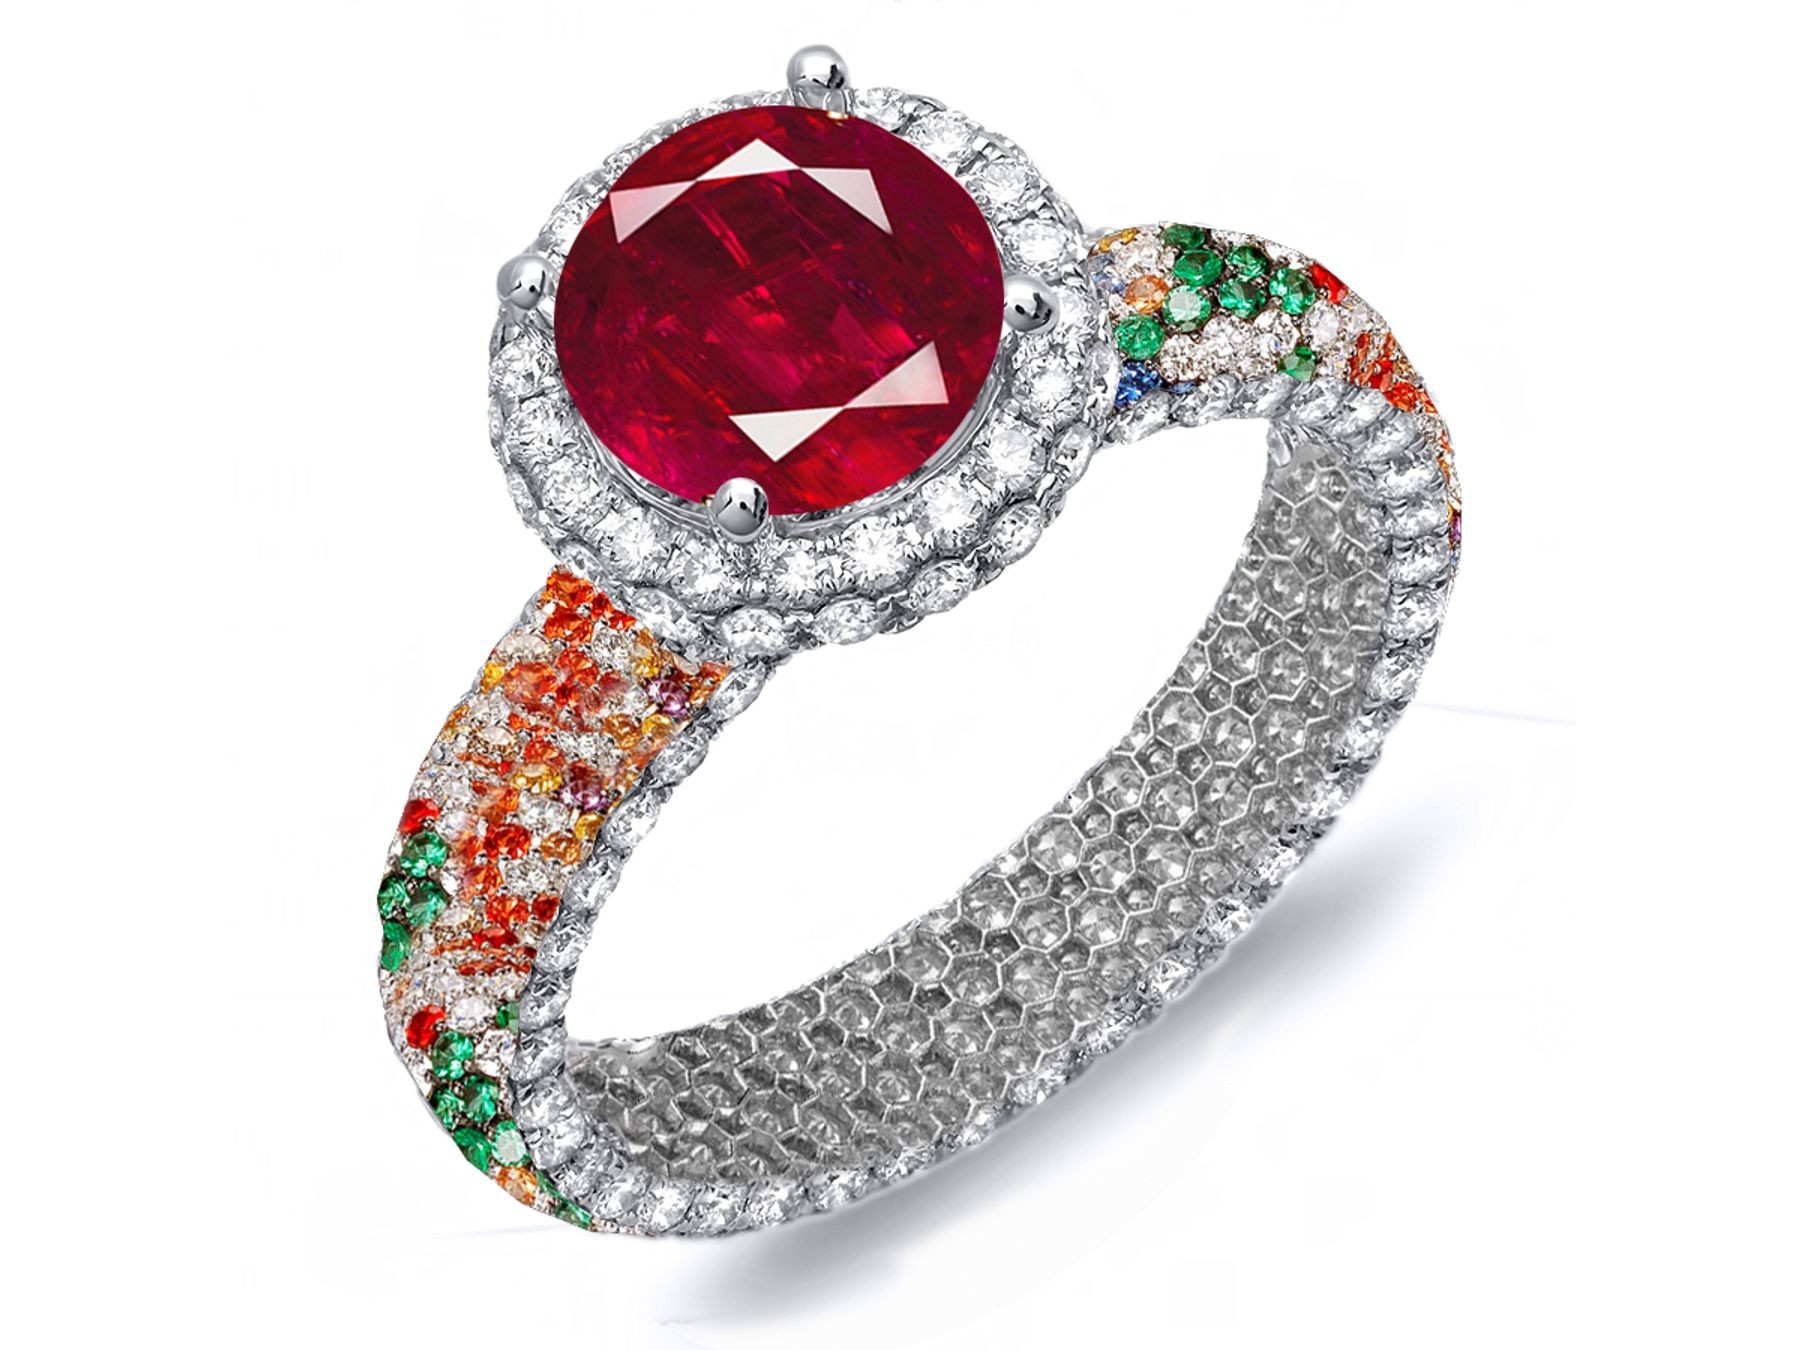 Custom Delicate French Pave Halo Diamonds & Multi-Colored Gemstone Rings